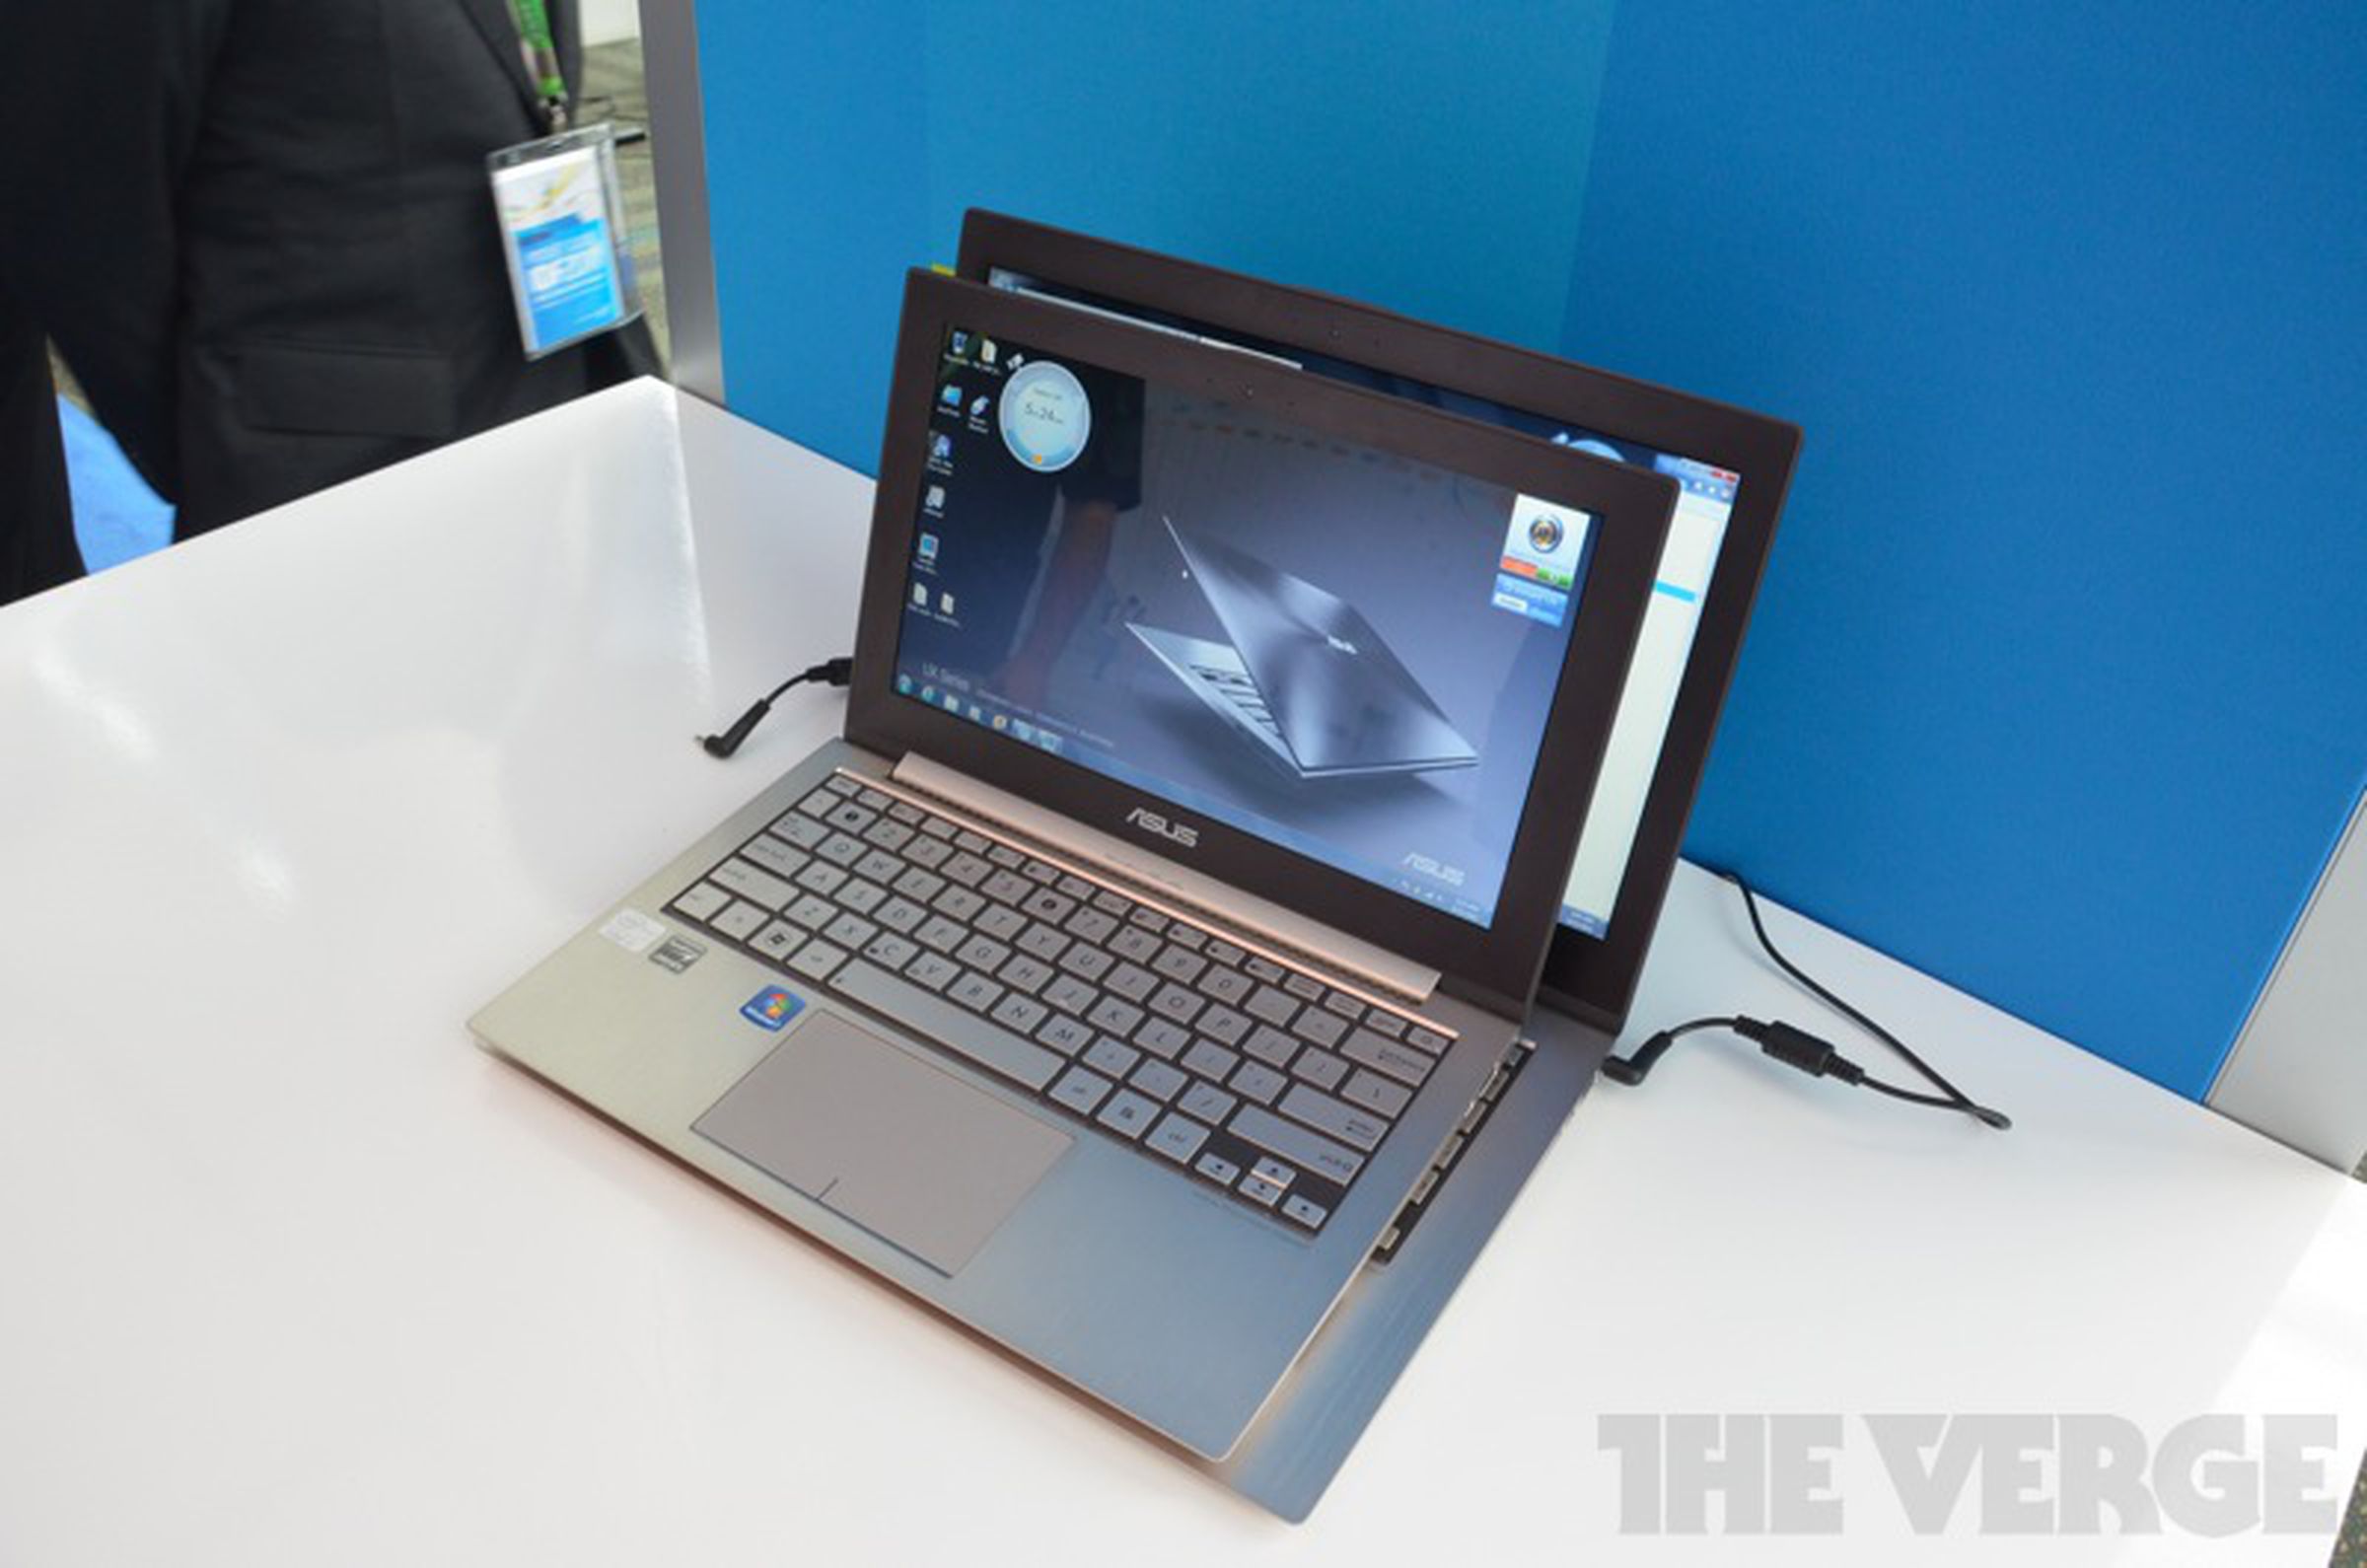 Asus UX31 13-inch ultrabook hands-on pictures